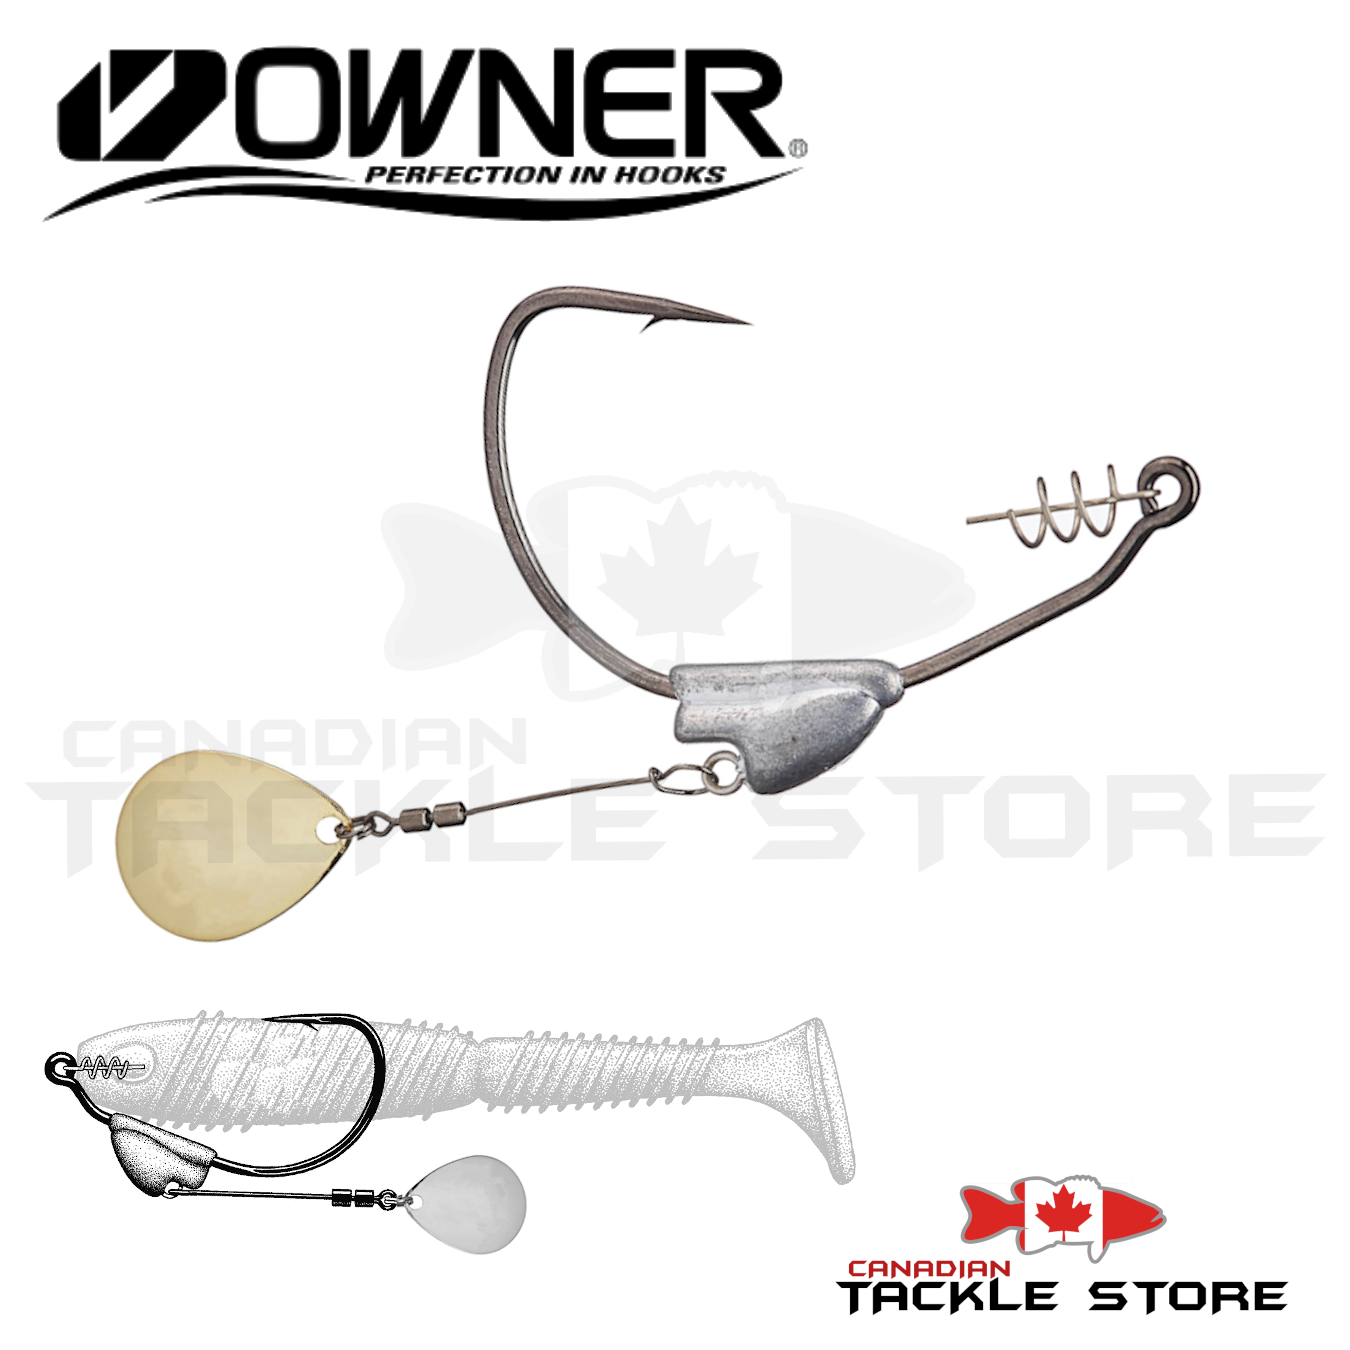 Owner Hooks Flashy Swimmer Jig – Canadian Tackle Store